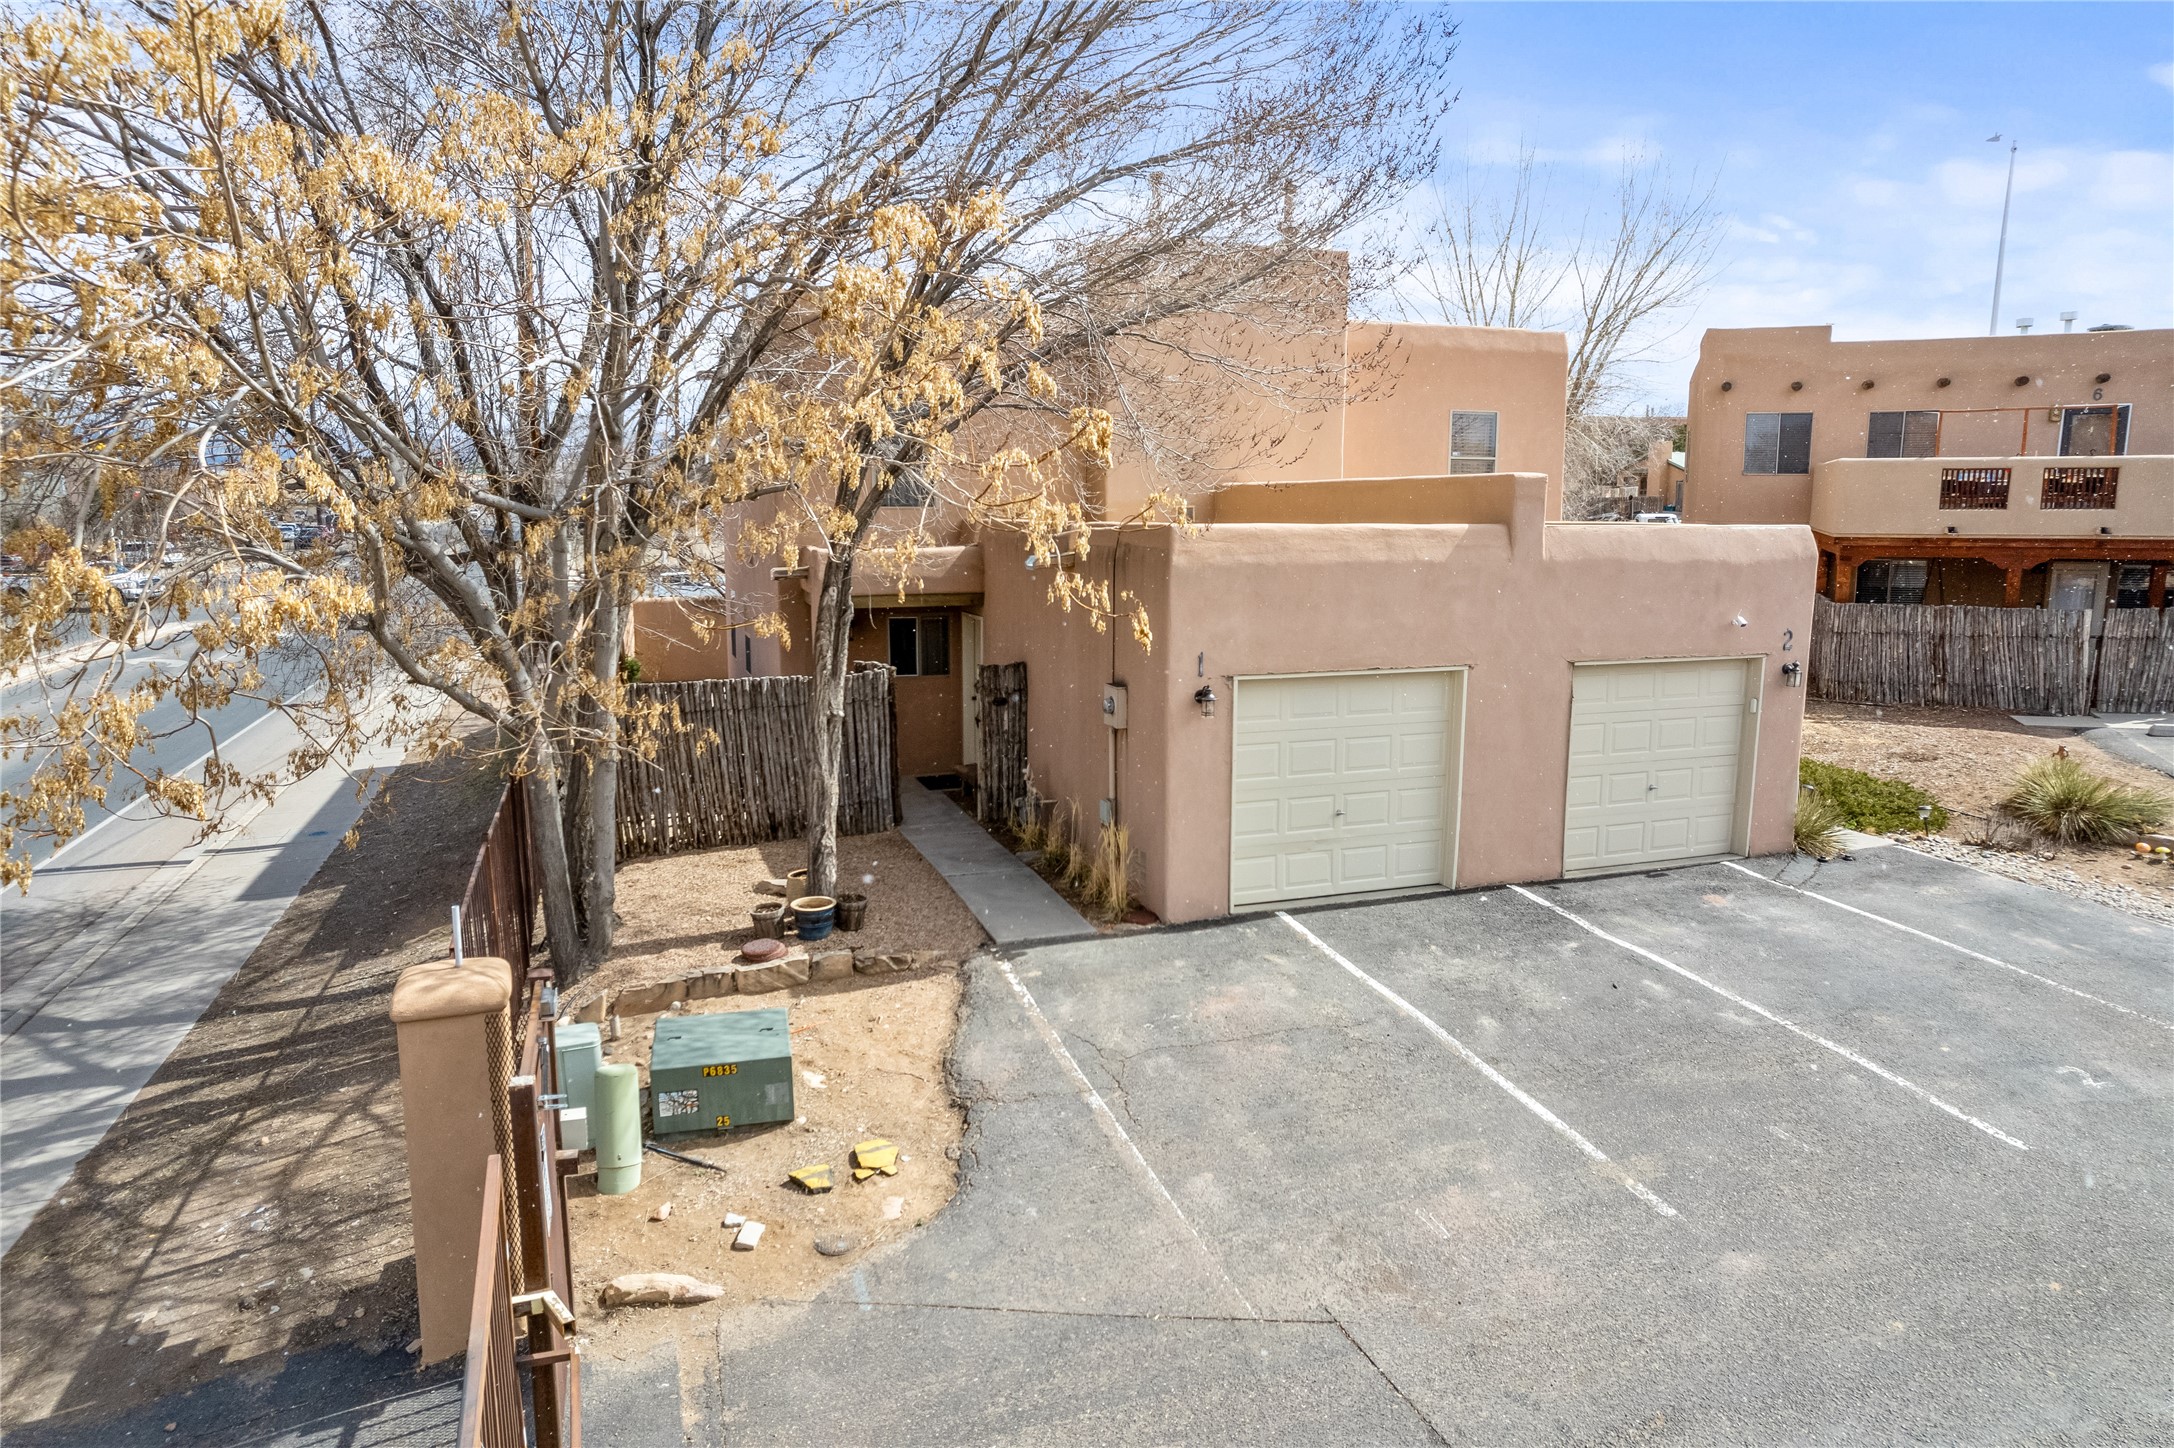 3300 Rufina Street A-1, Santa Fe, New Mexico 87507, 2 Bedrooms Bedrooms, ,2 BathroomsBathrooms,Residential,For Sale,3300 Rufina Street A-1,202400808